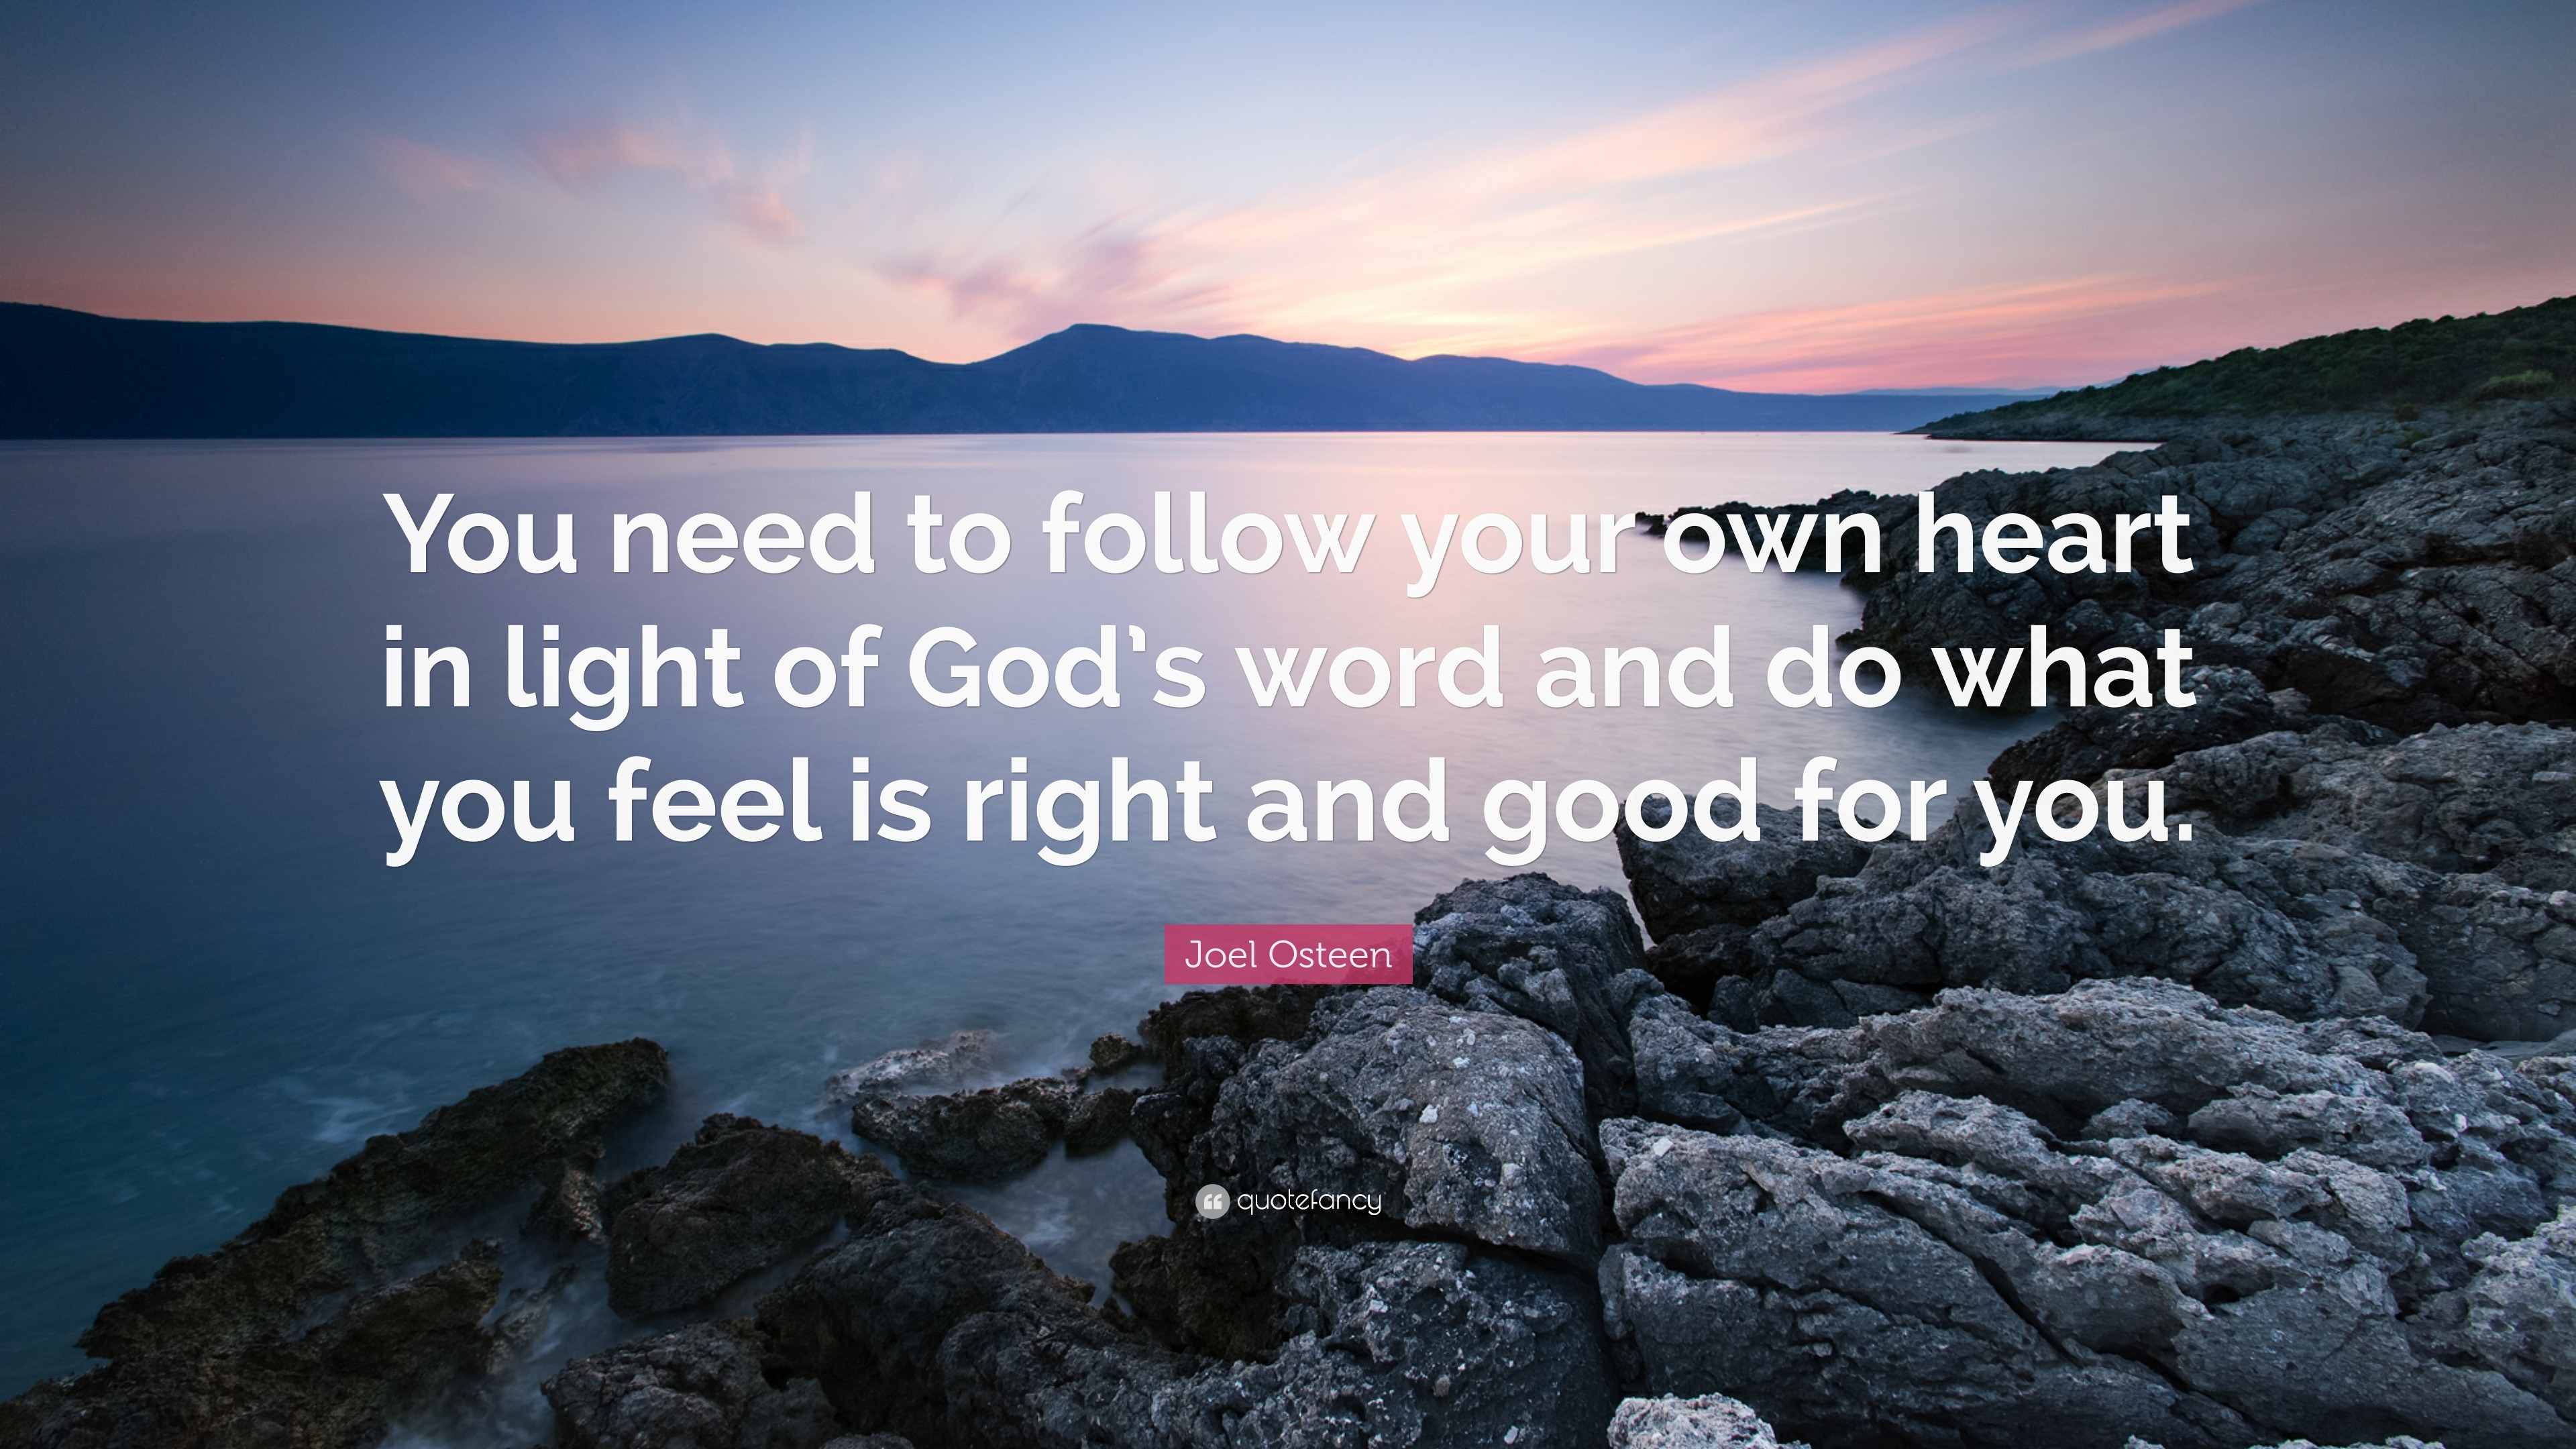 Osteen Quote: “You need to follow your own in light of God's word and